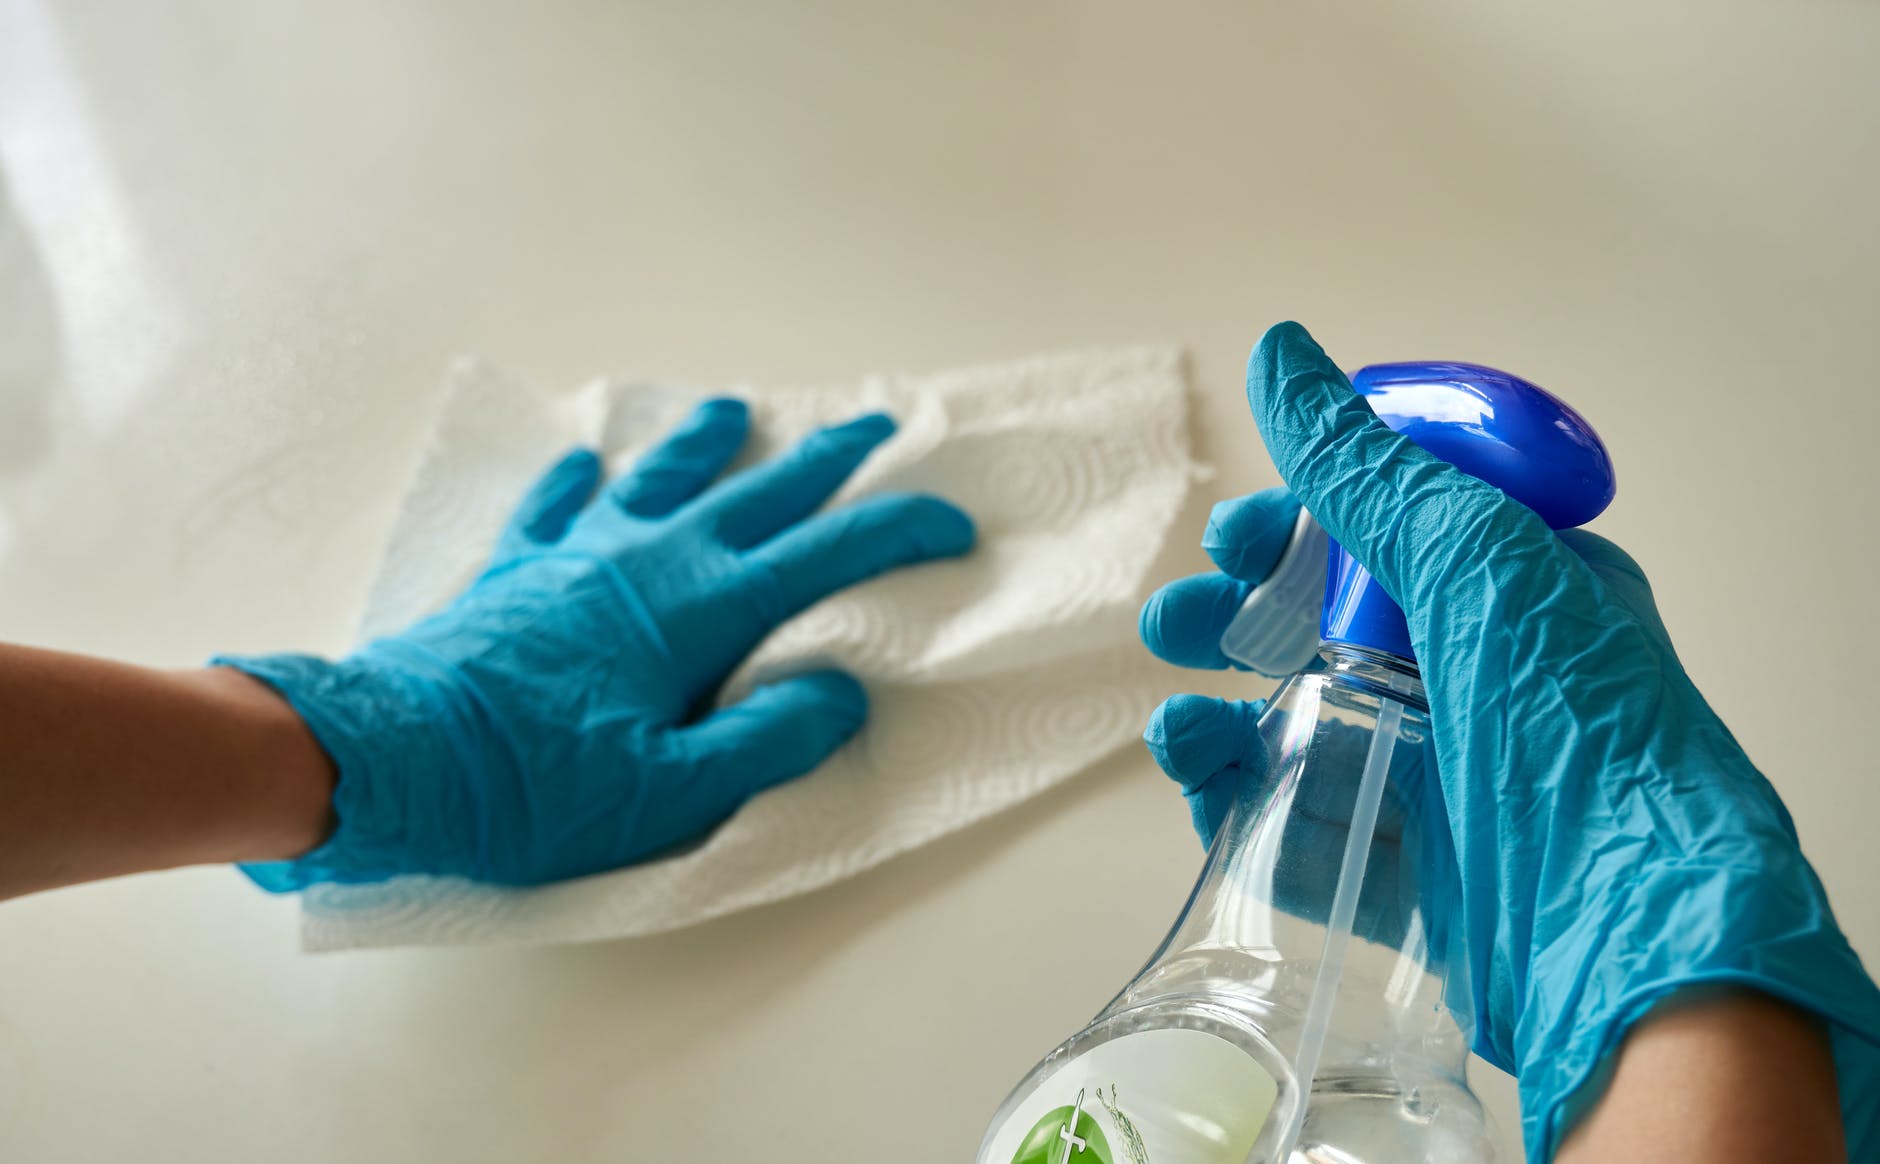 Hands with Gloves Holding a Spray Bottle